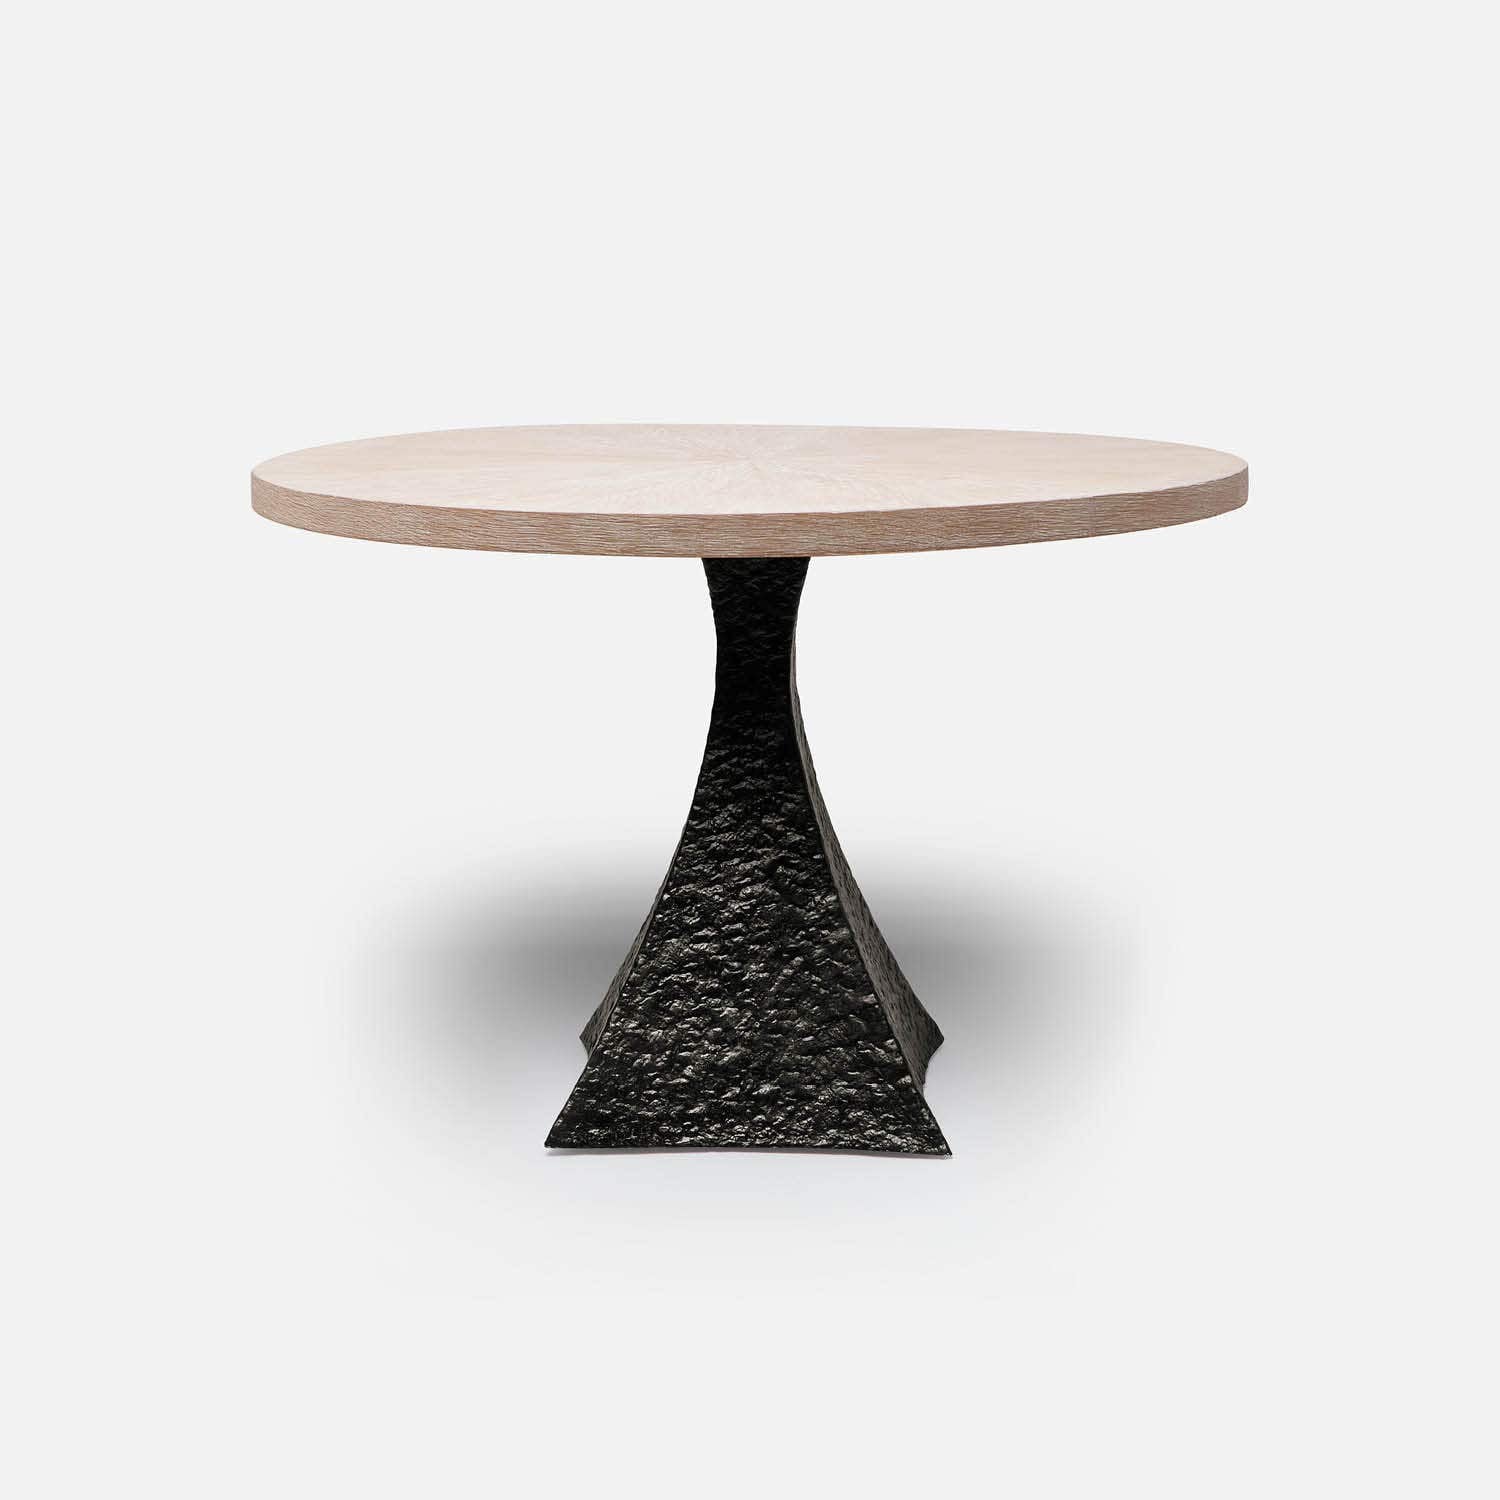 Made Goods Noor 60" x 30" Bumpy Black Iron Dinning Table With Round White Cerused Oak Table Top